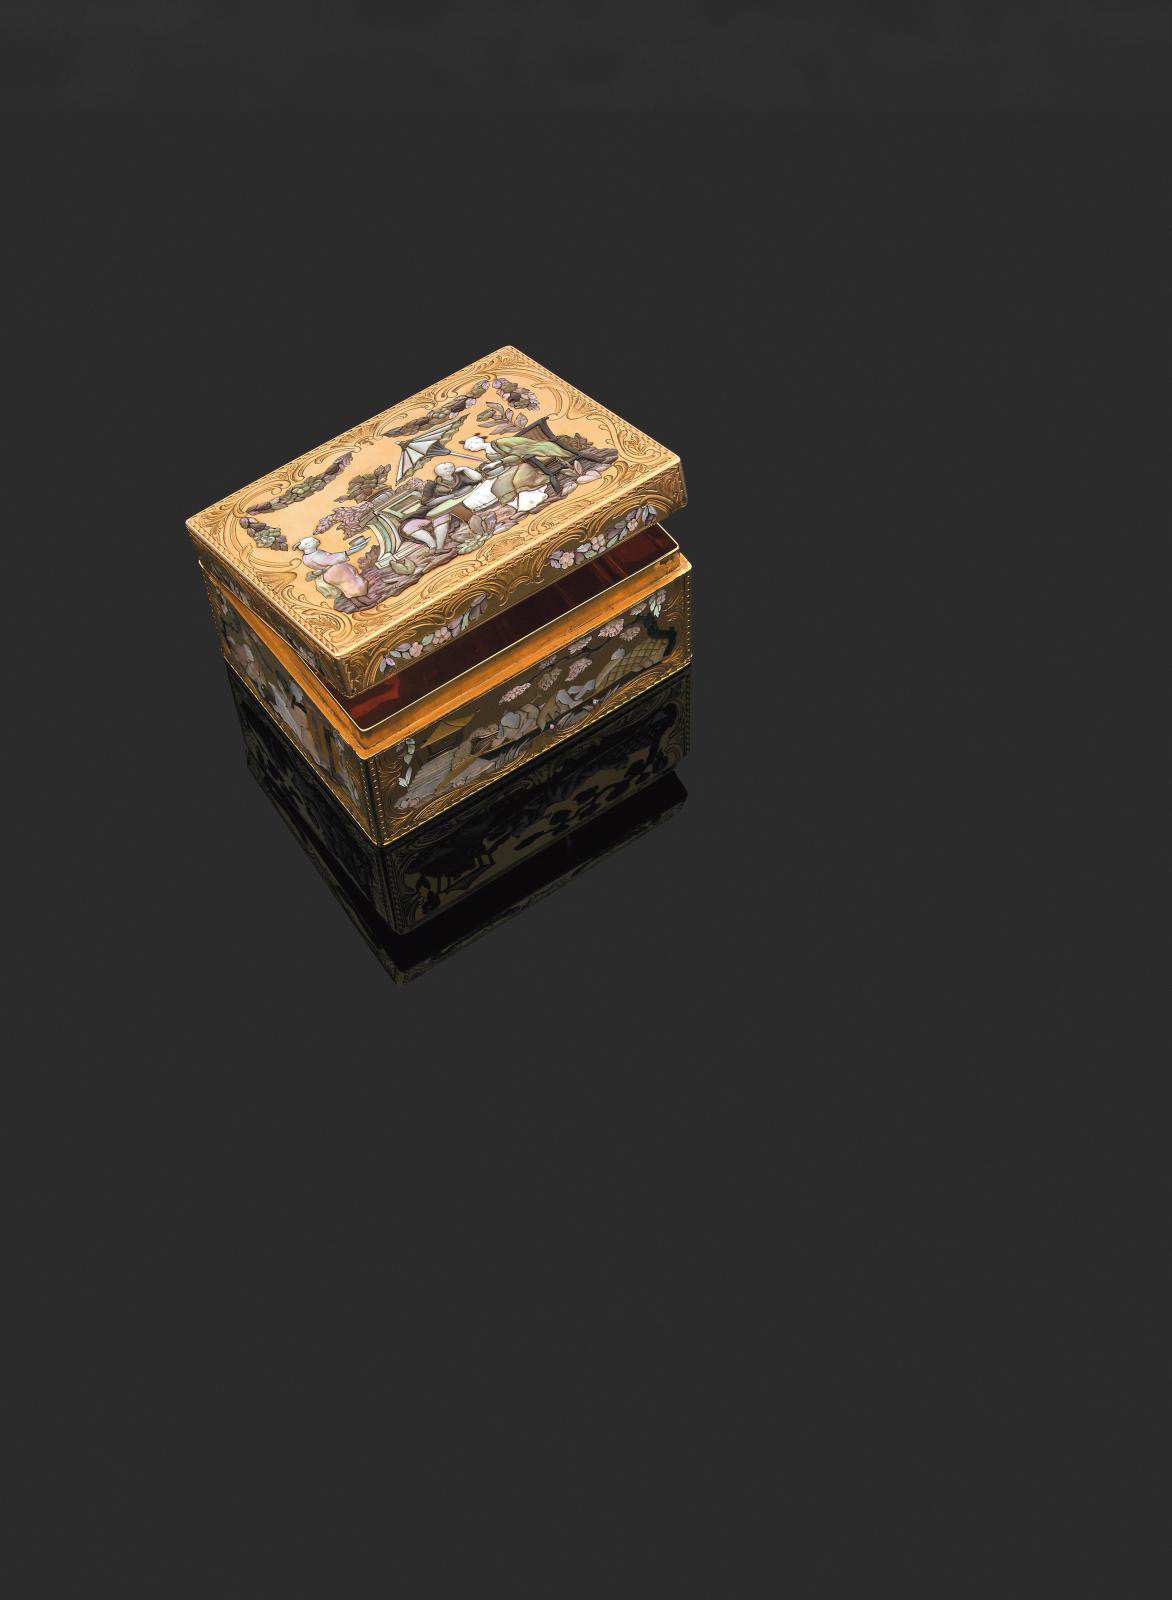 This Precious Snuffbox Is Nothing to Sneeze At